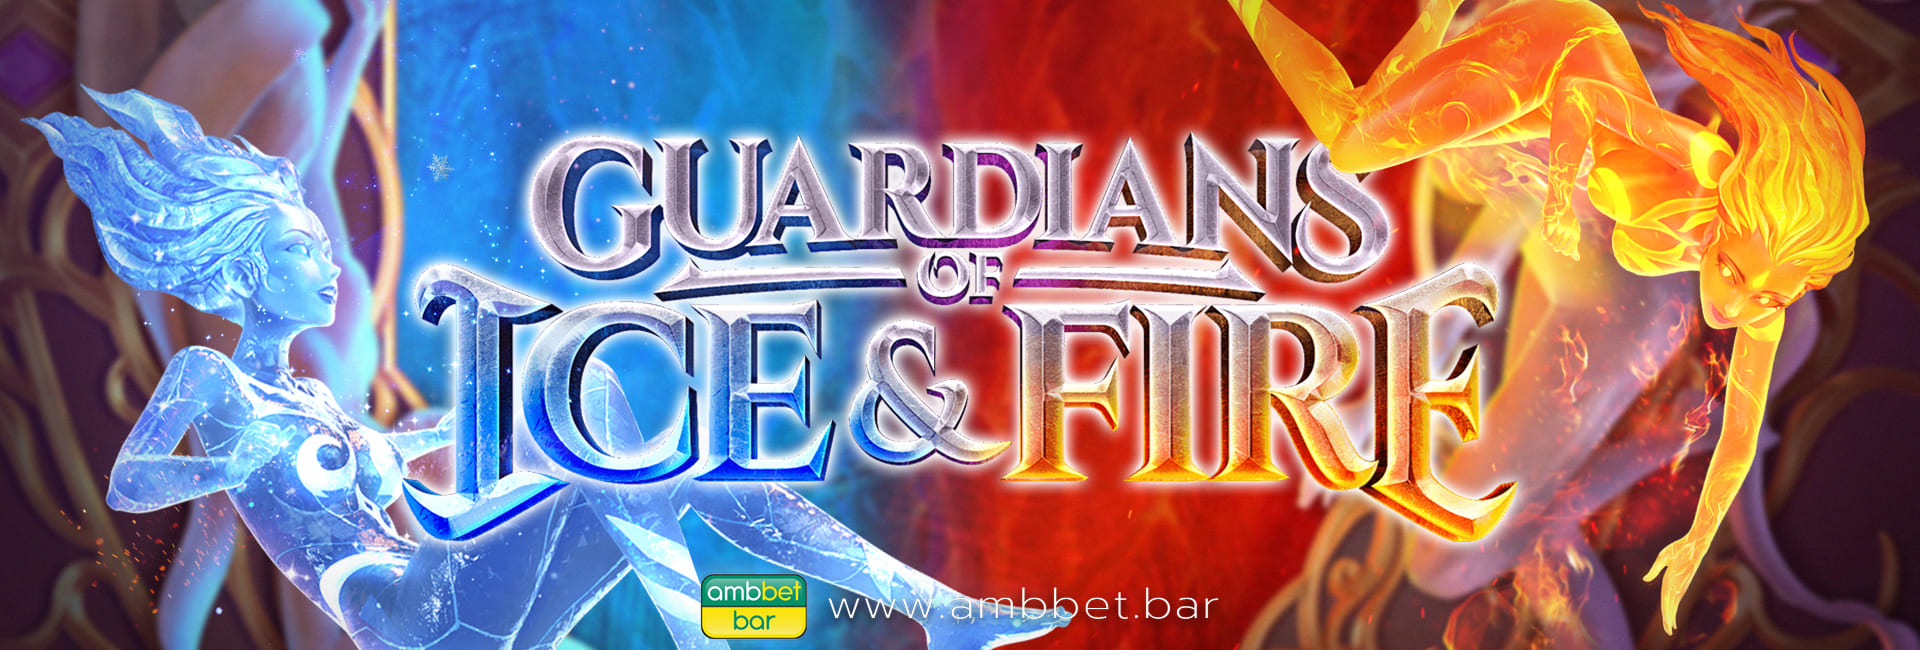 Guardians of Ice & Fire banner